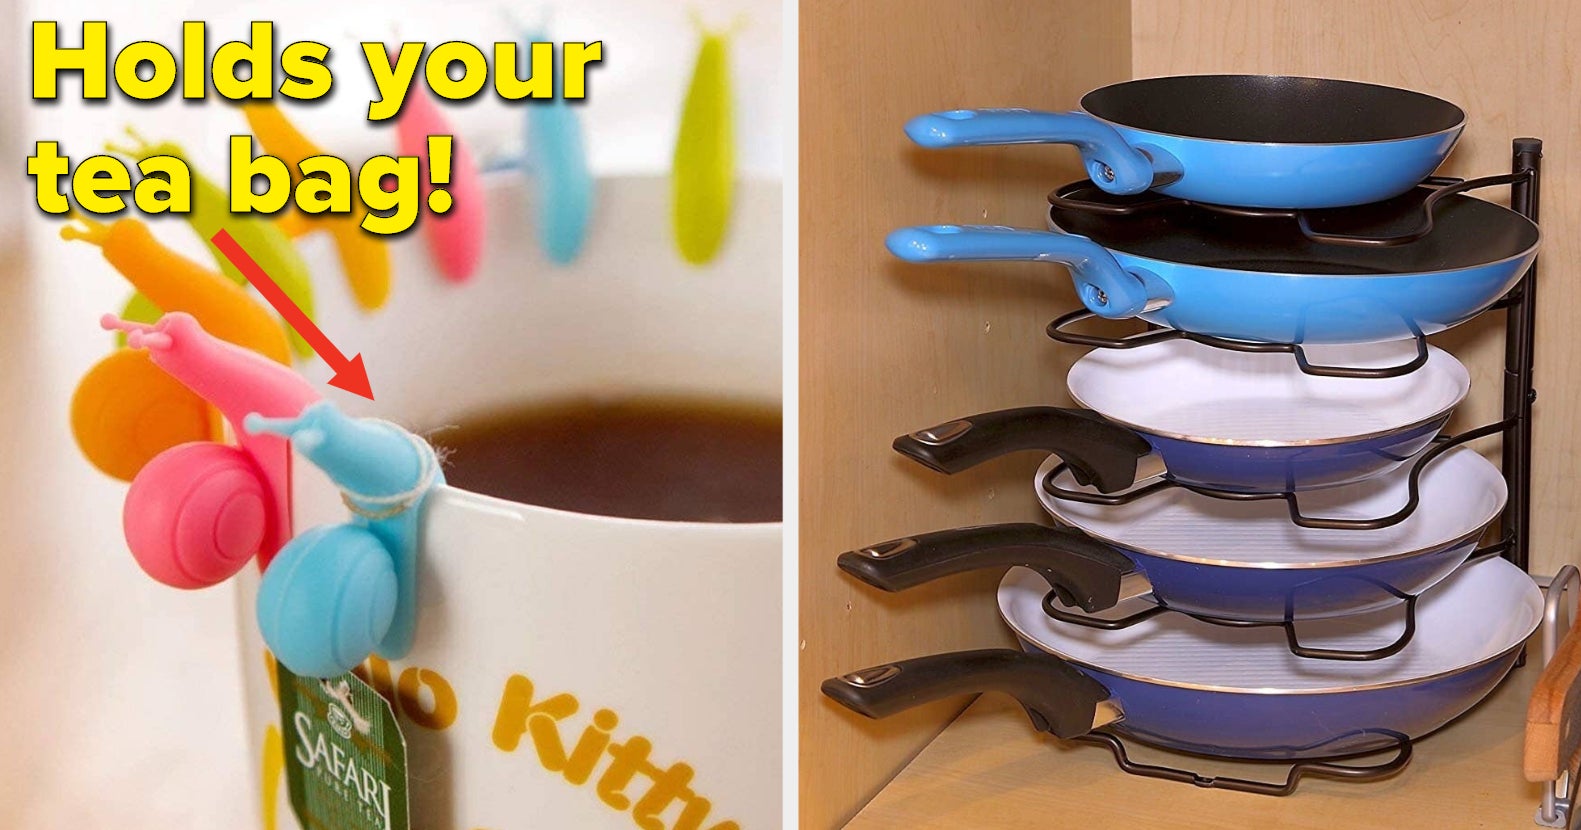 5 cool Japanese life hacks and gadgets to beat the summer heat